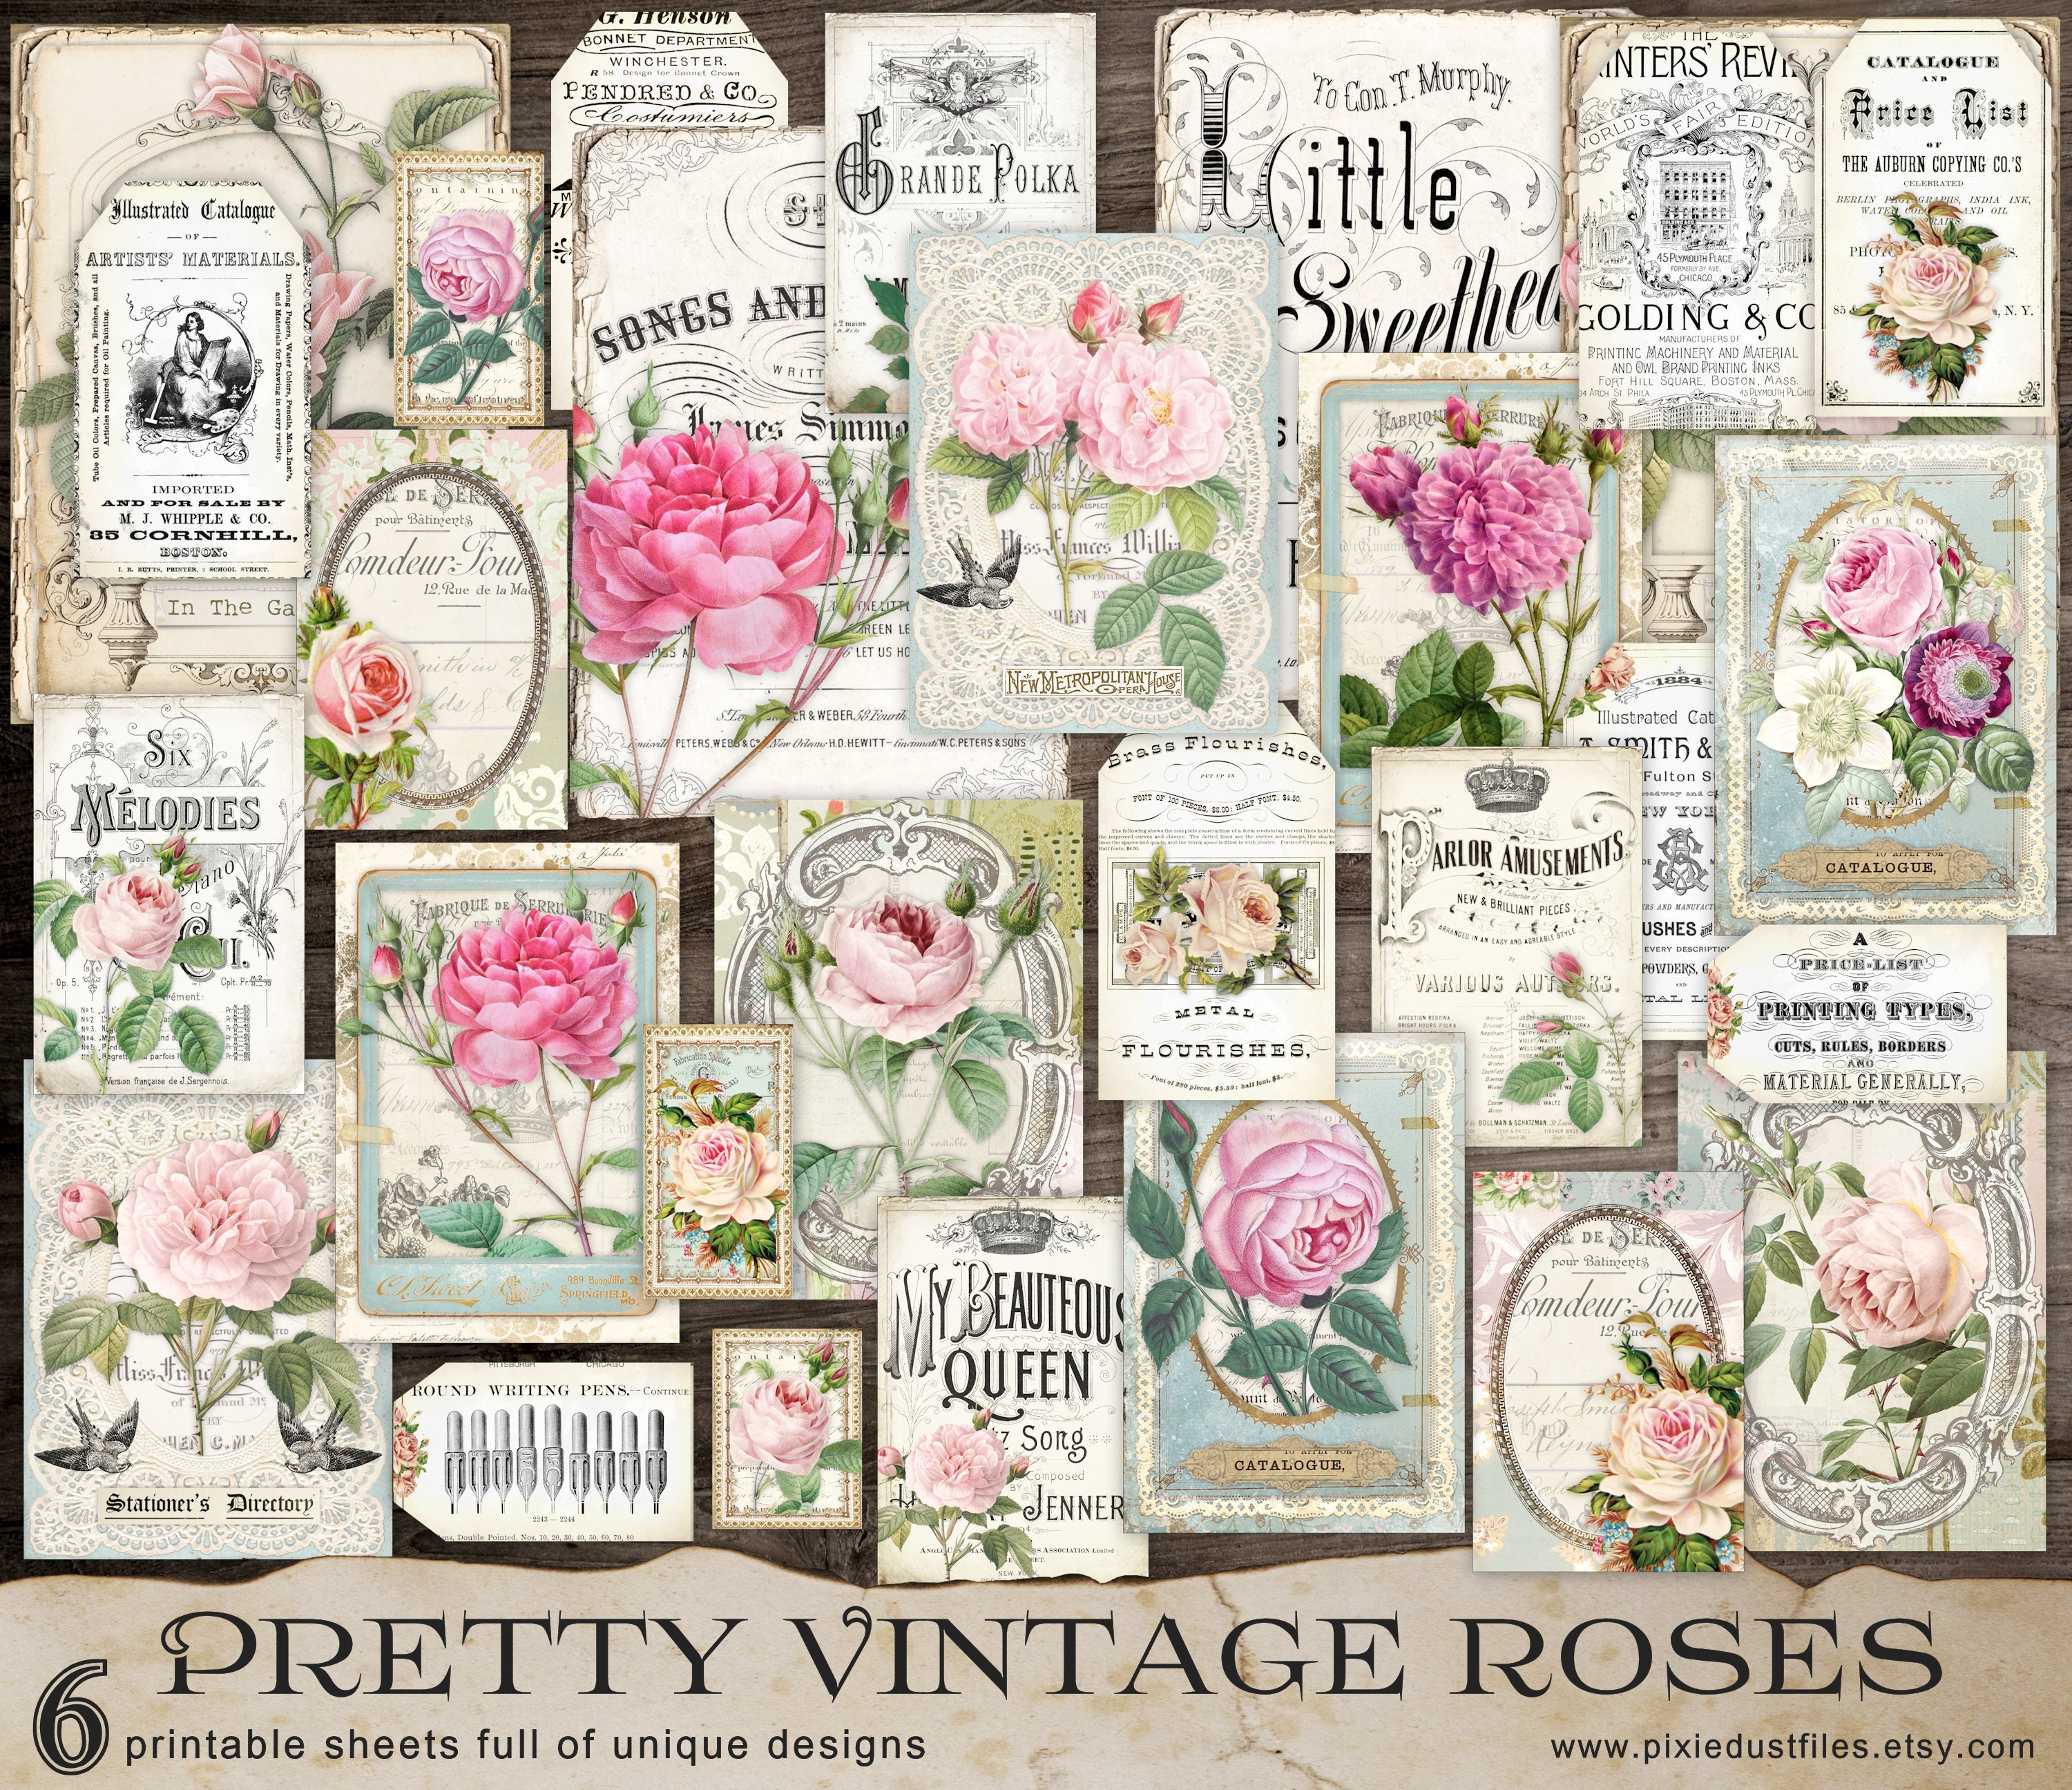 Elegant Vintage Rose Prayer Junk Journal Kit with Ephemera: Full Color Collection of Beautiful Vintage Rose Christian Faith Prayer Pages and